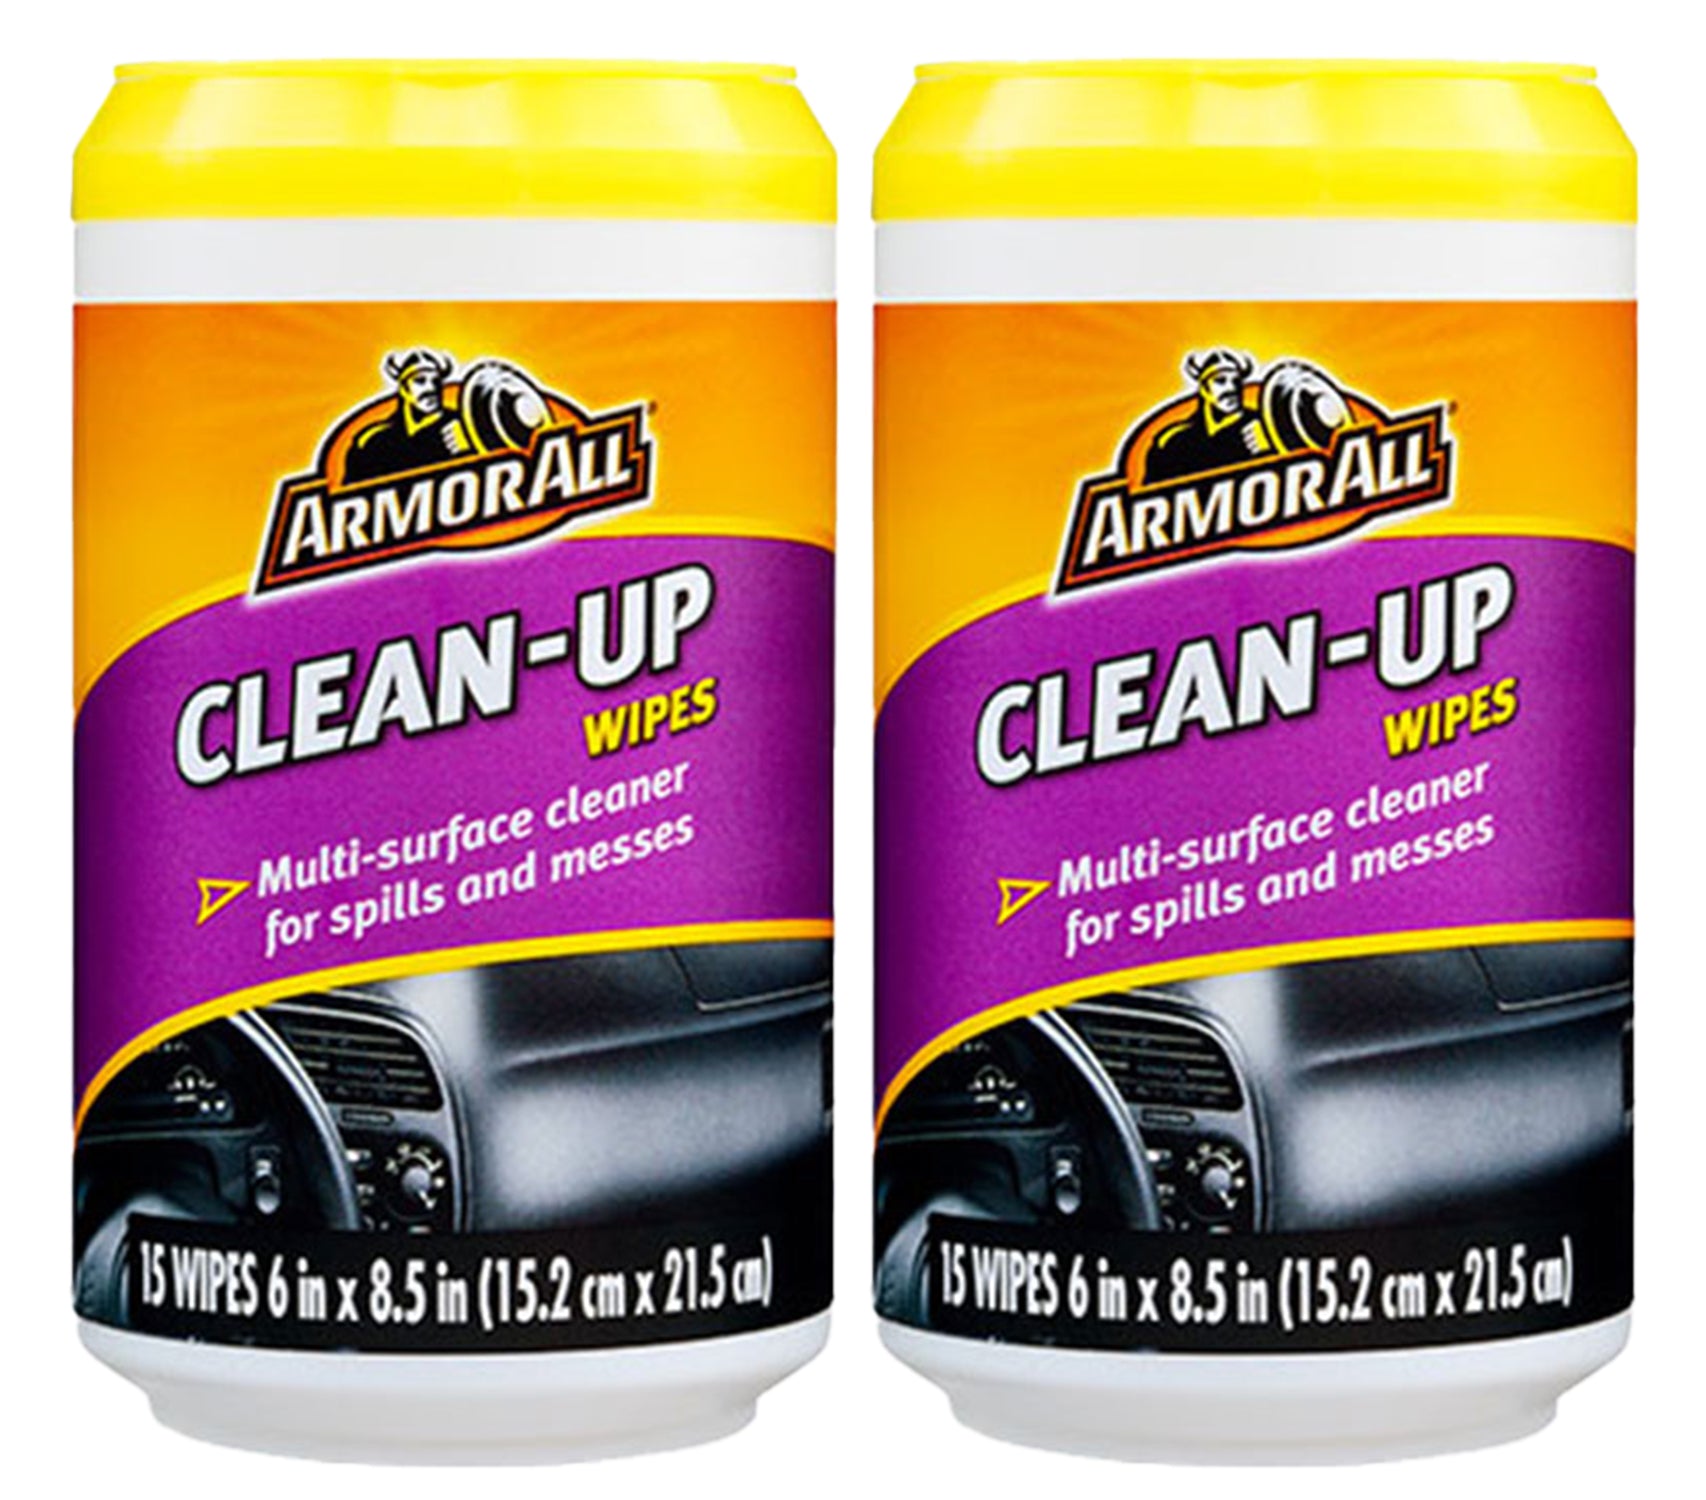 Armor All Car Interior Cleaner: Car Cleaning Supplies & Car Wipes for Quick  Clean-Up, 15 Wipes, 2 Packs